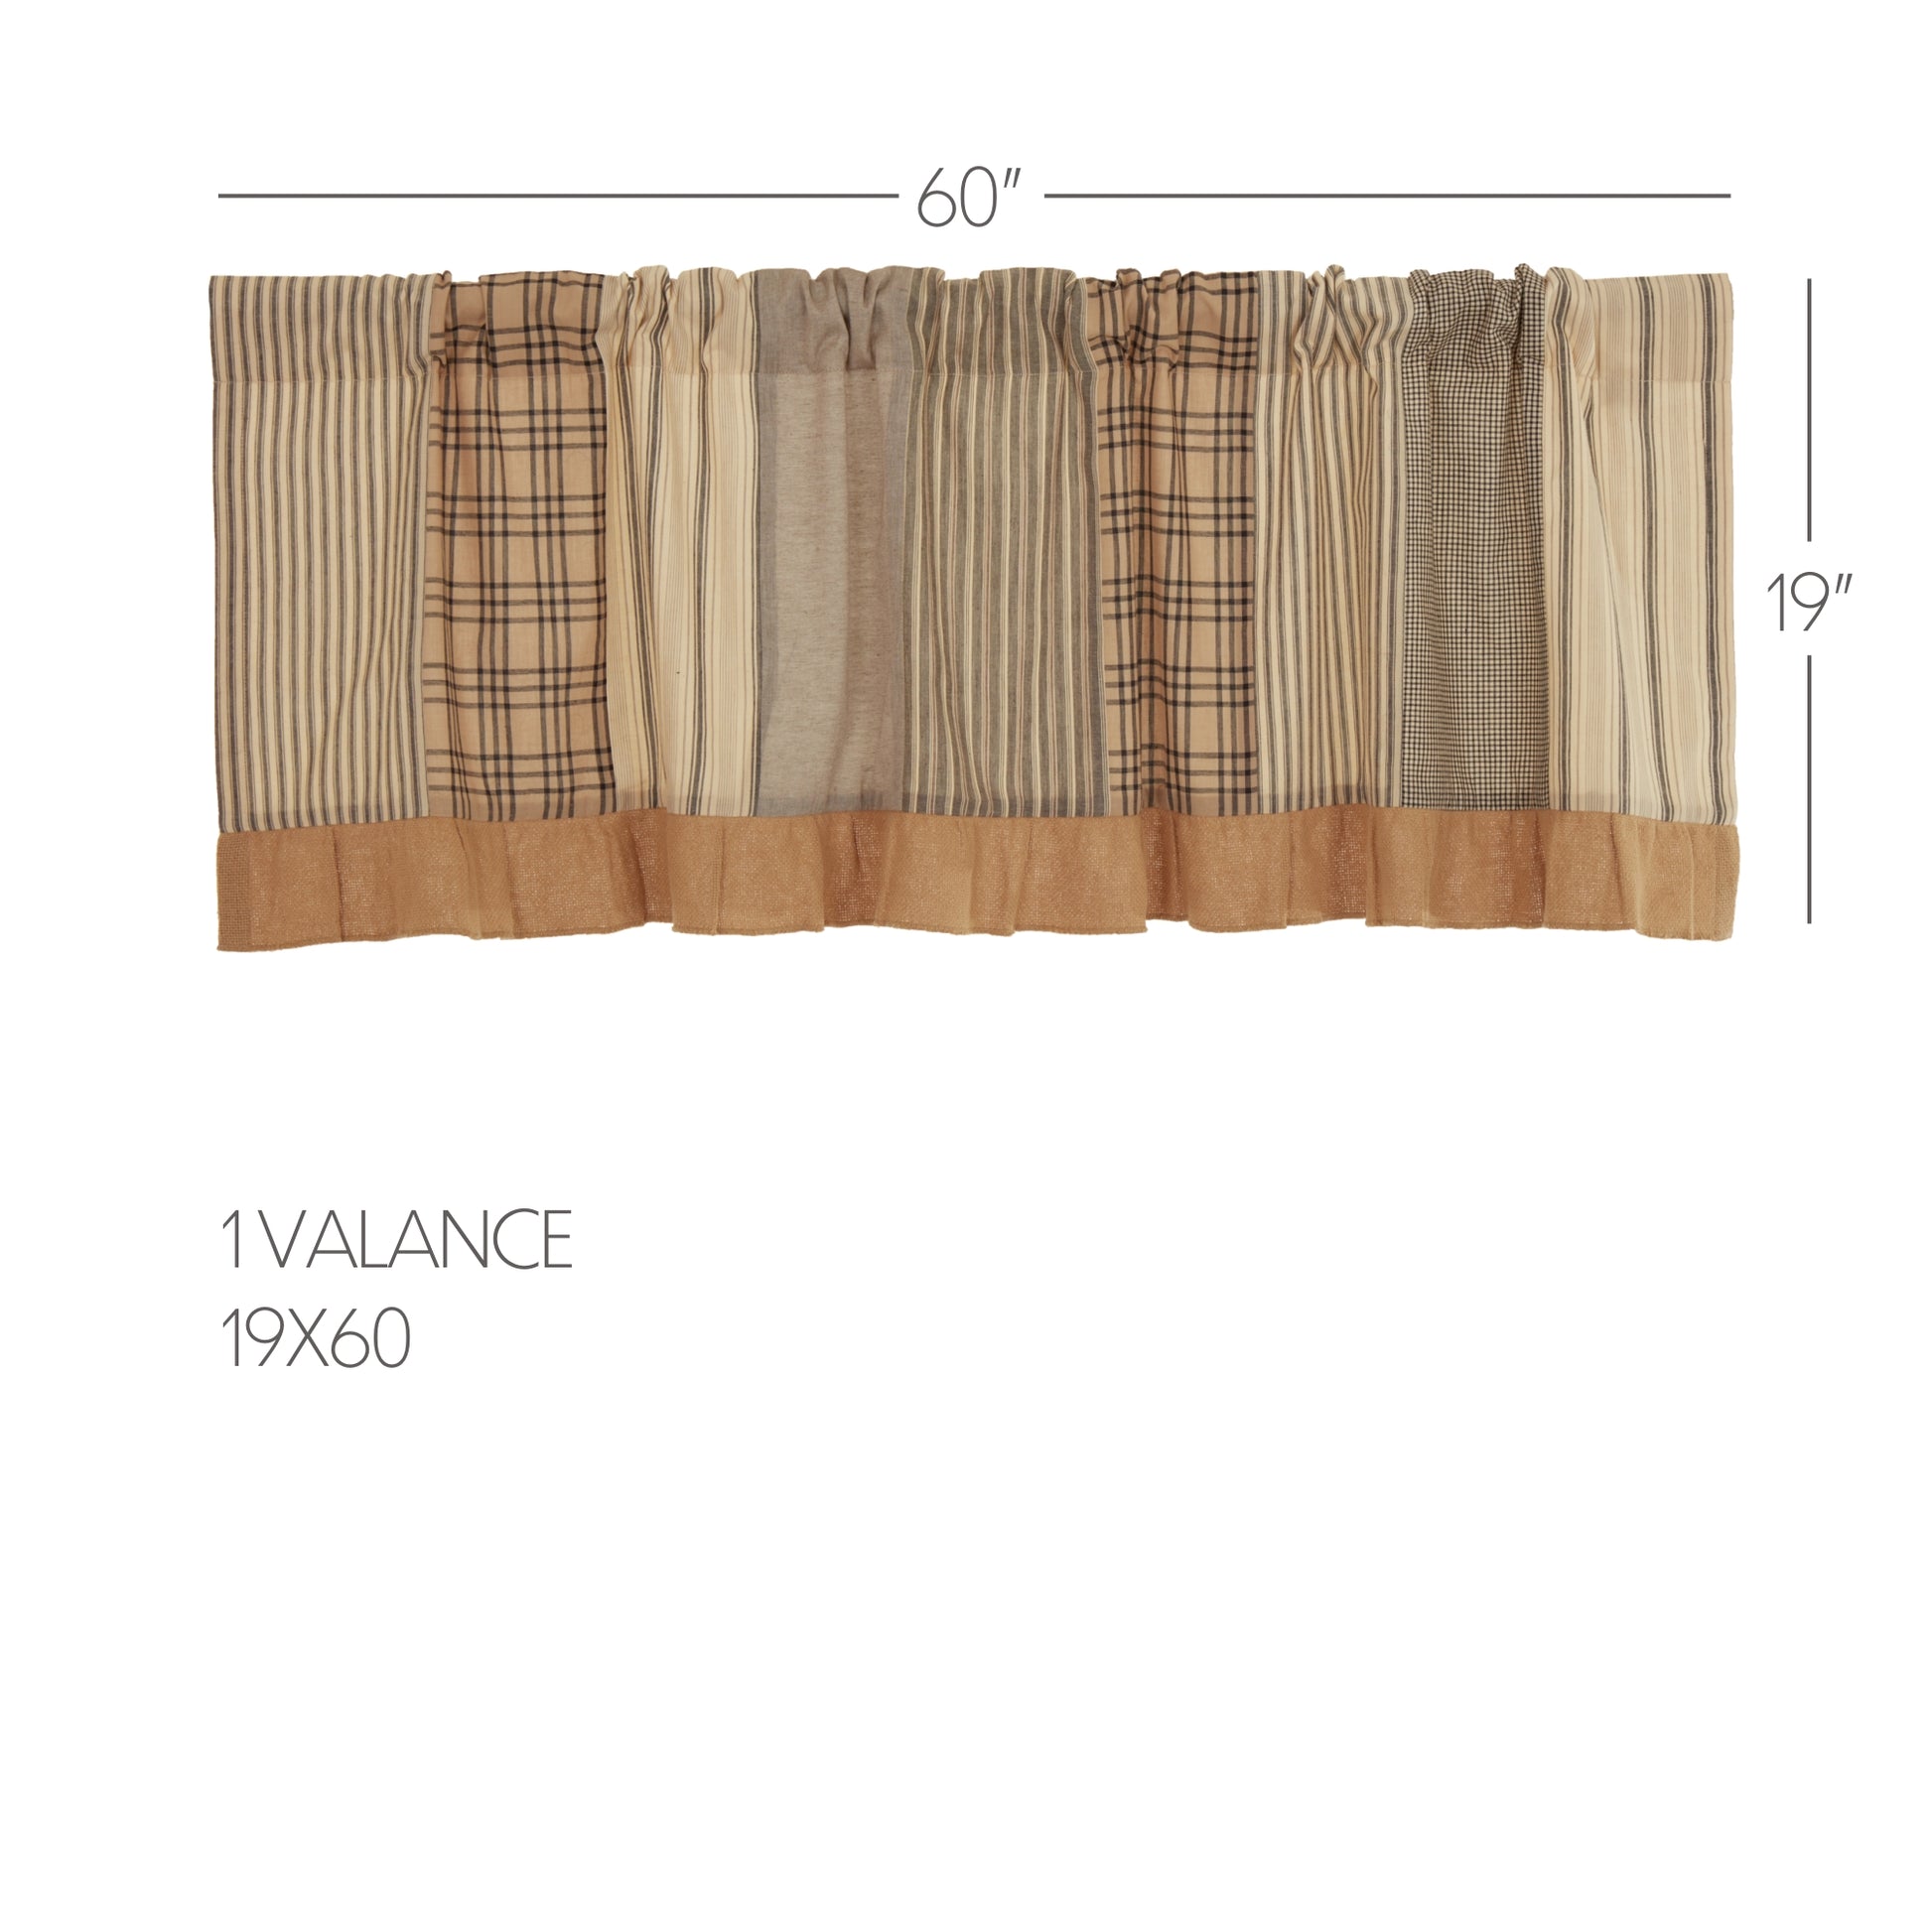 56758-Sawyer-Mill-Charcoal-Patchwork-Valance-19x60-image-1